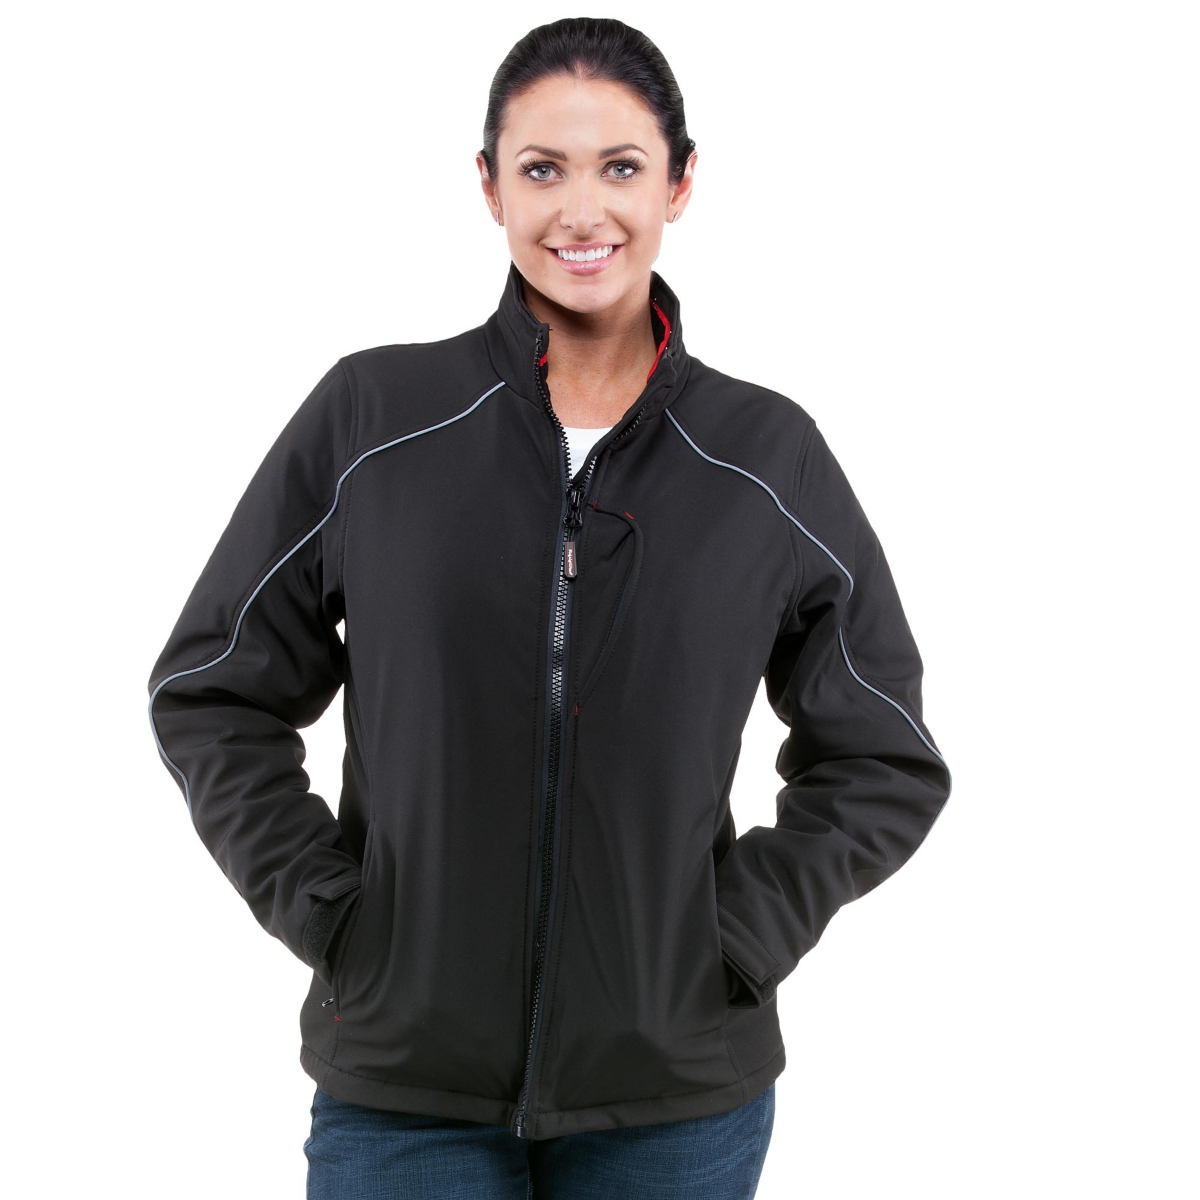 Women's Warm Insulated Softshell Jacket with Thumbhole Cuffs - Black